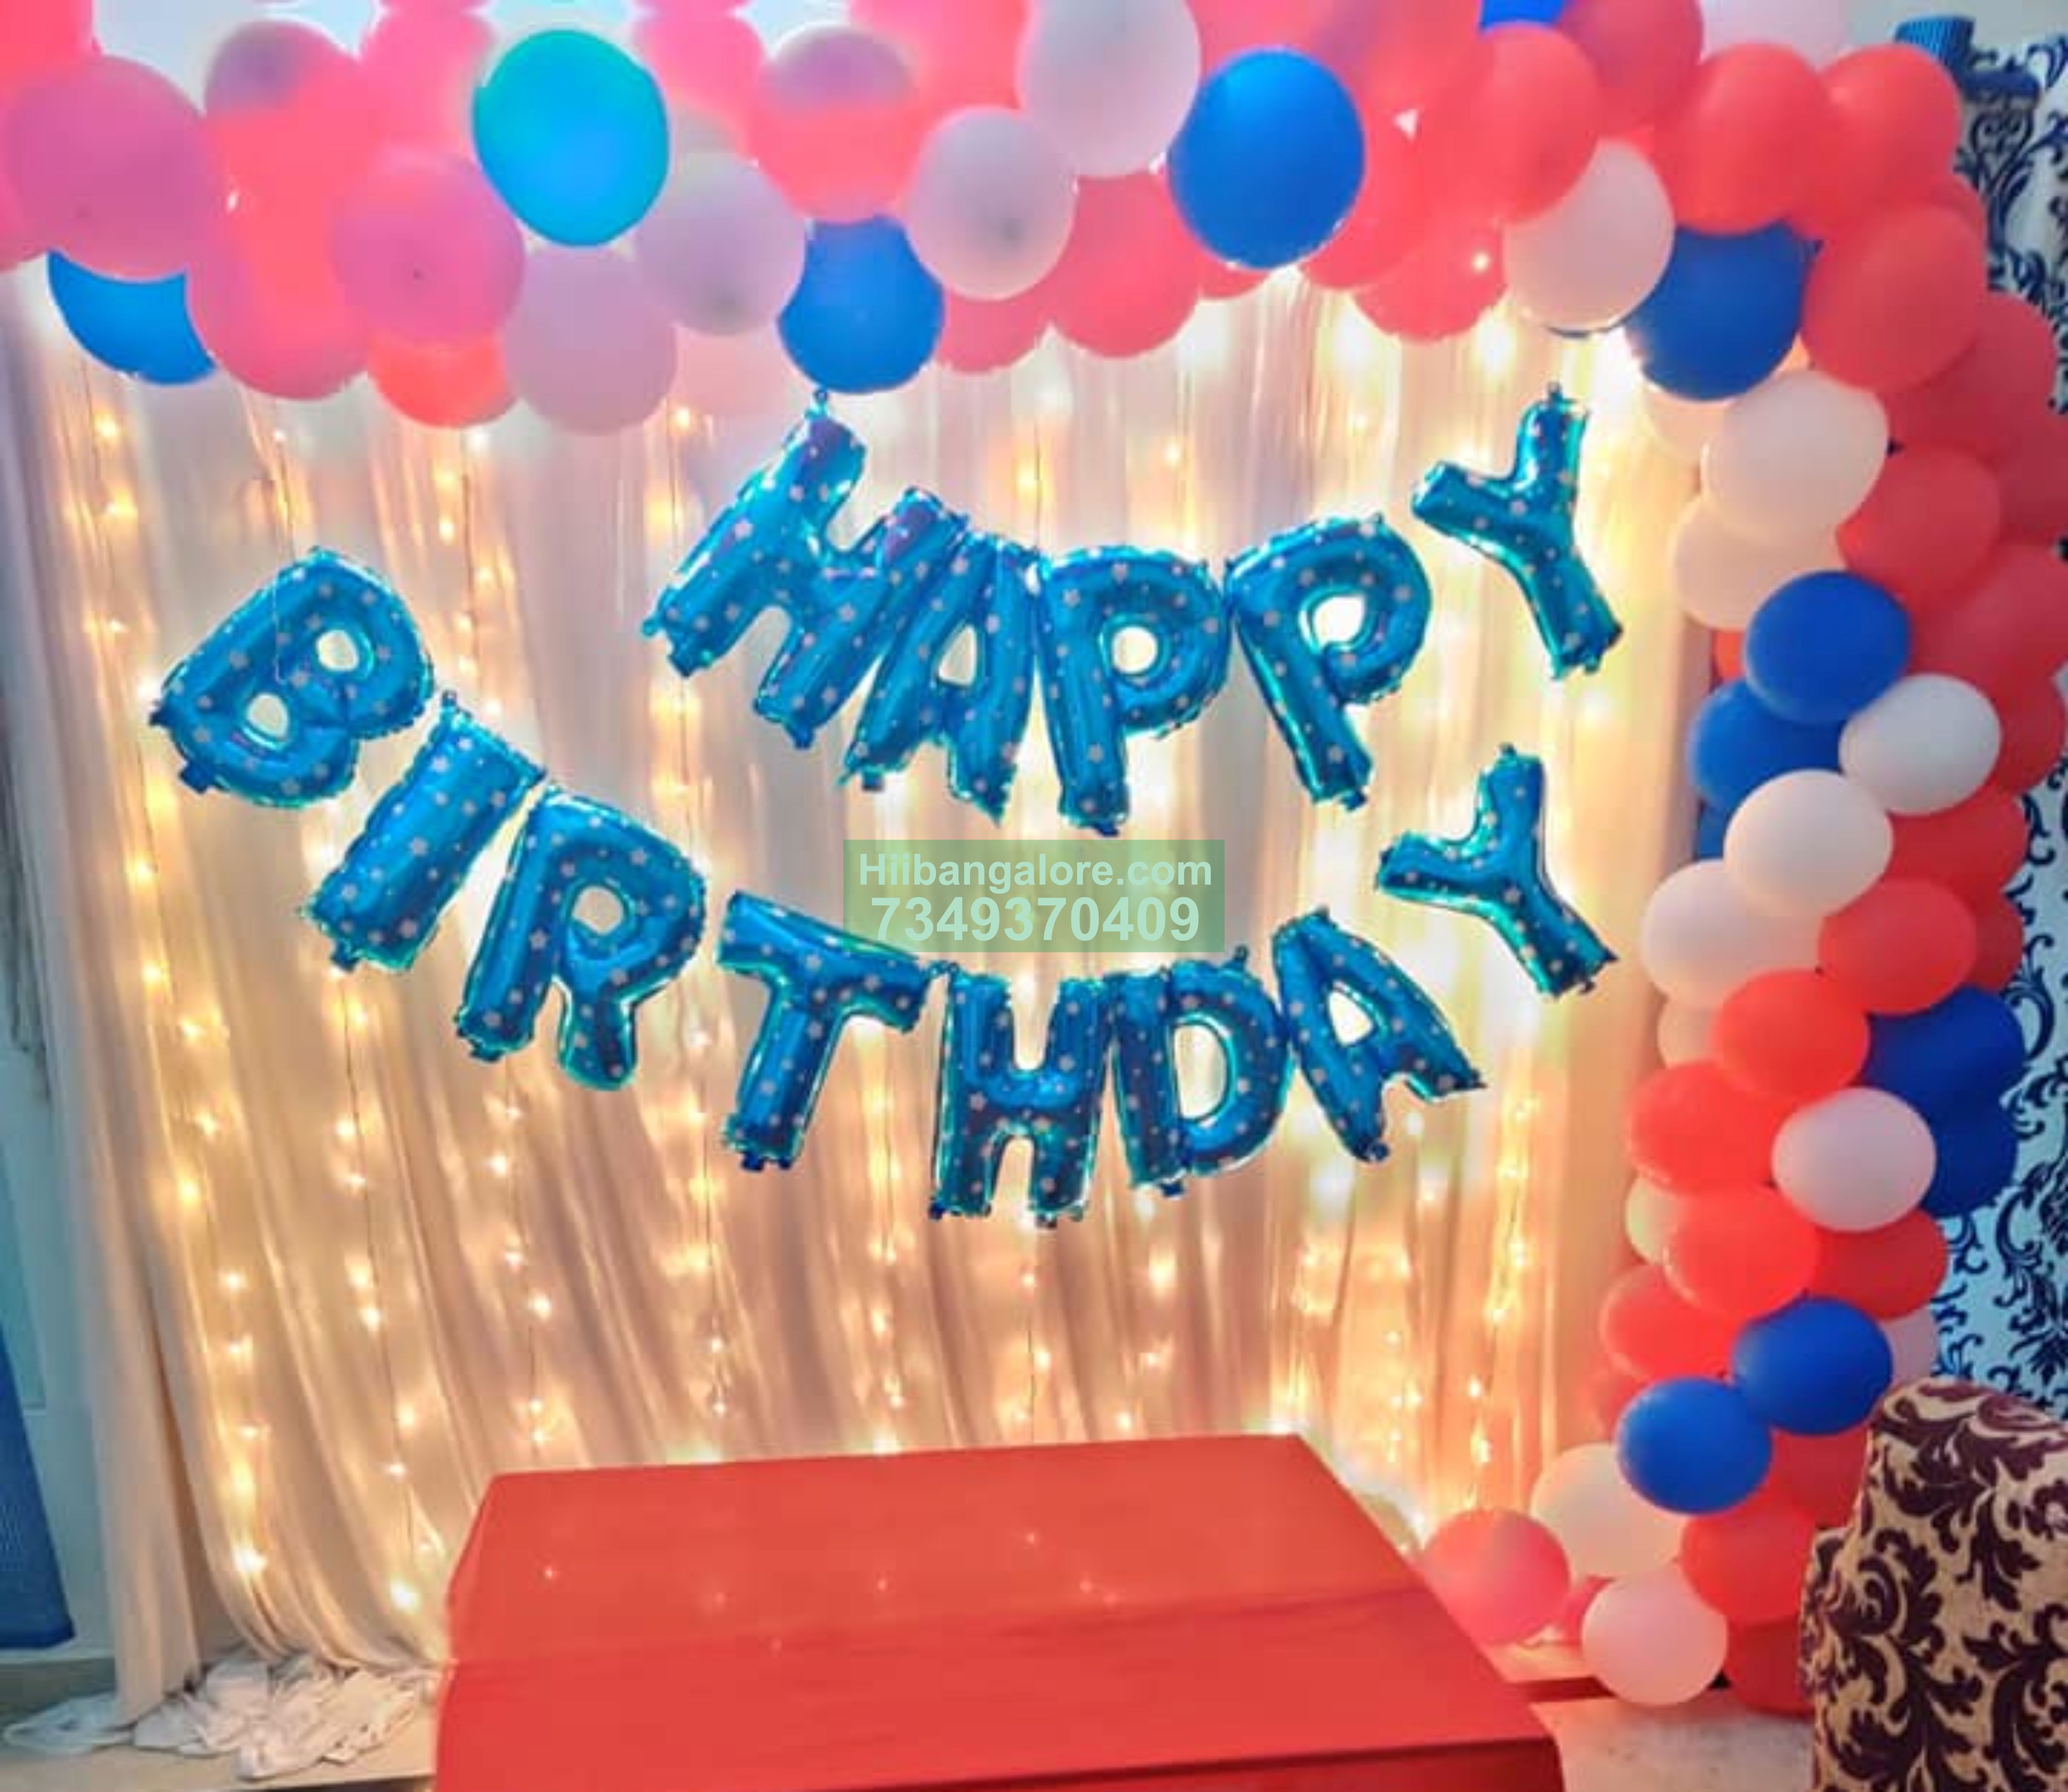 Simple 18th Birthday Party Ideas At Home For Boy